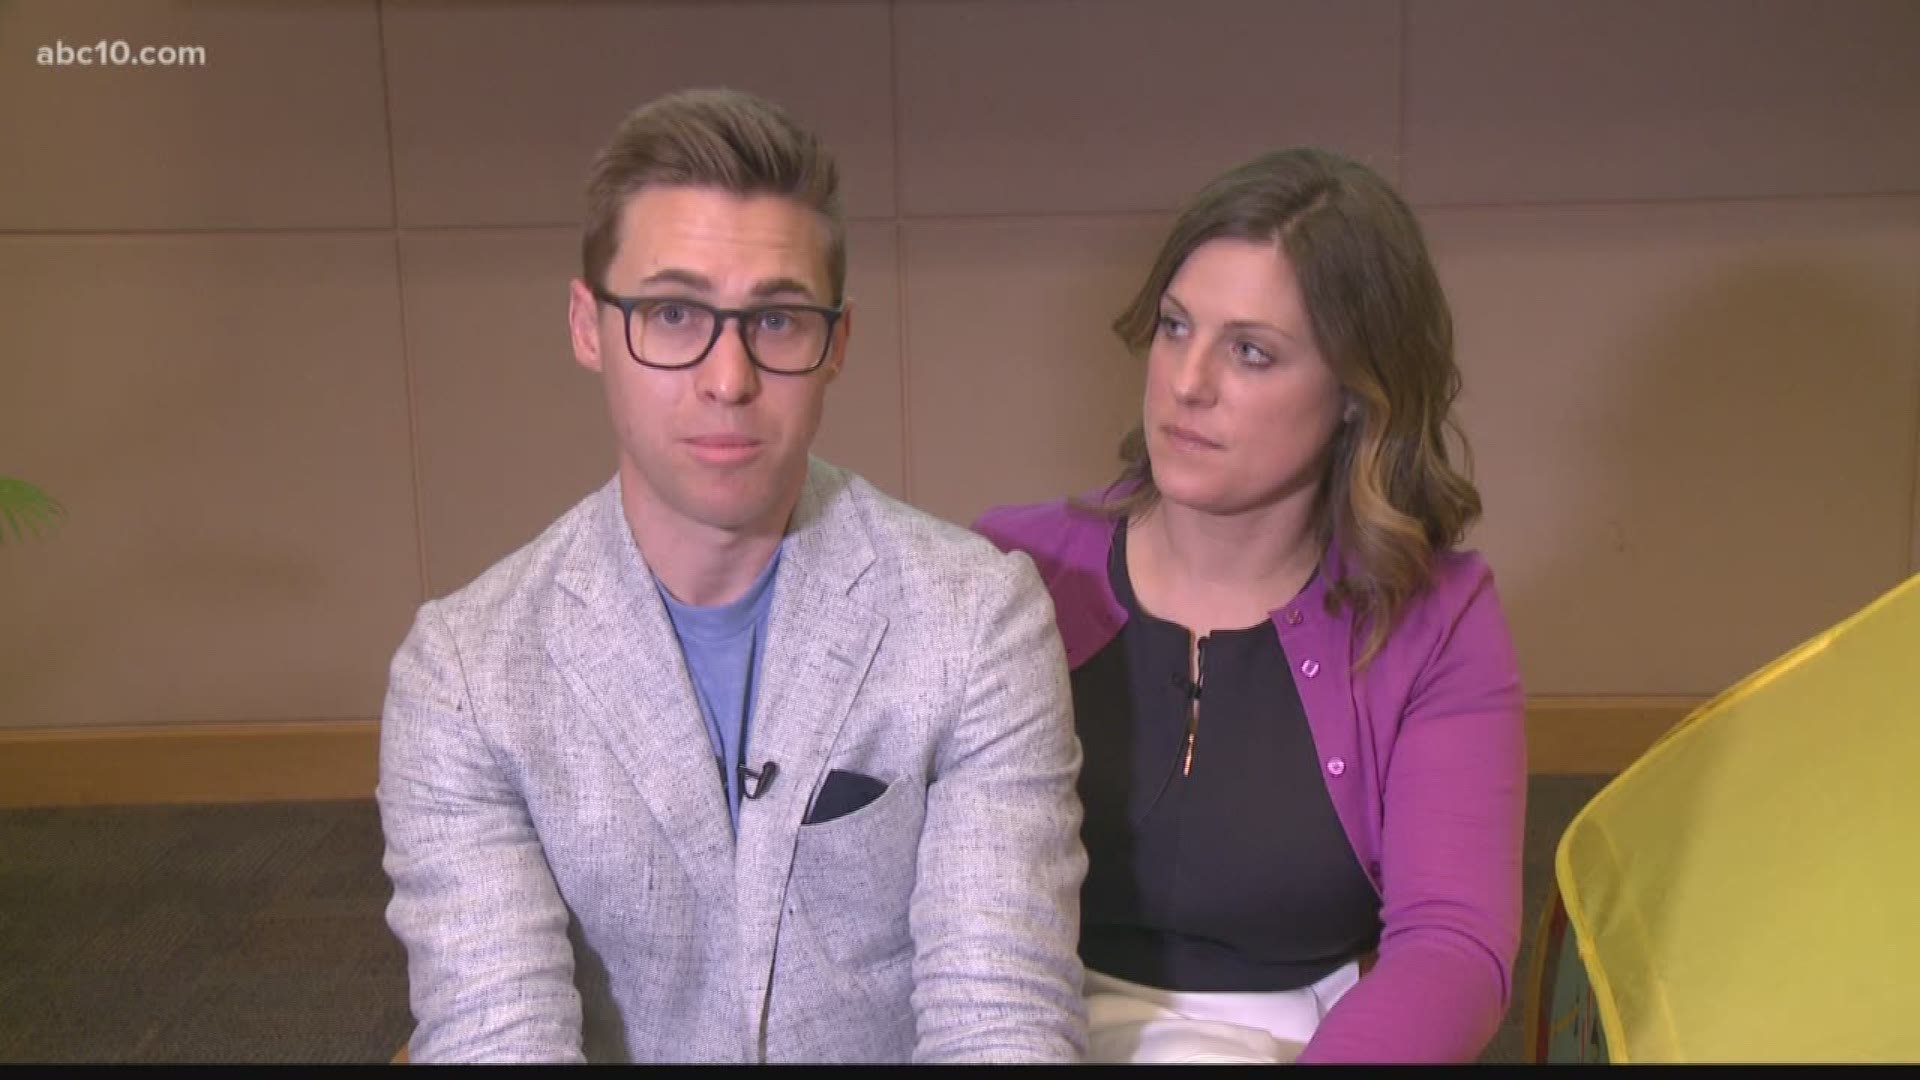 Jessica Kensky and Patrick Downes, a couple injured in the 2013 Boston Marathon bombing, were at the Shriners Hospital in Sacramento. (April 23, 2018)